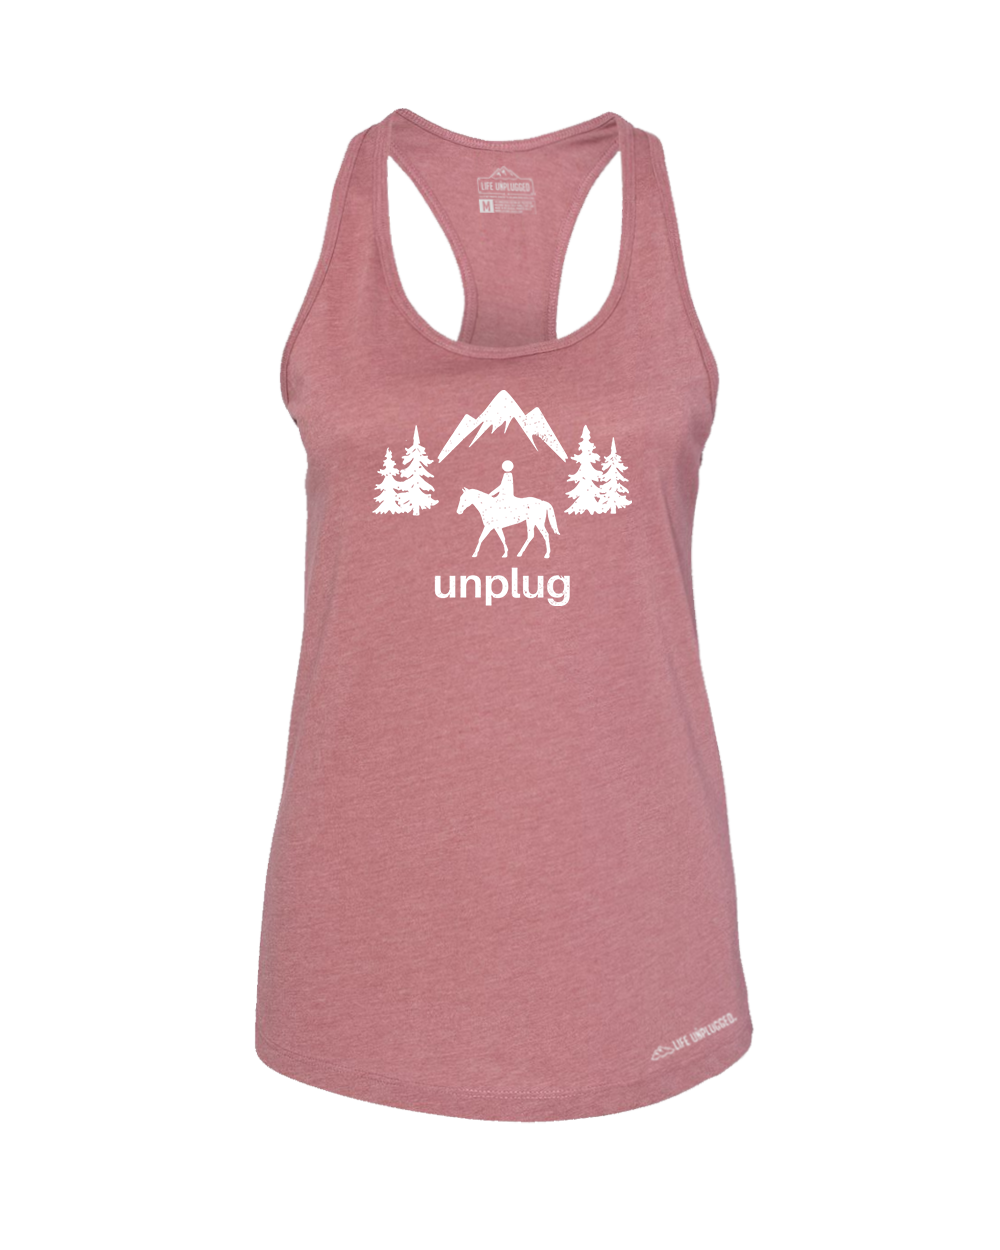 Horseback Riding Premium Women's Relaxed Fit Racerback Tank Top - Life Unplugged